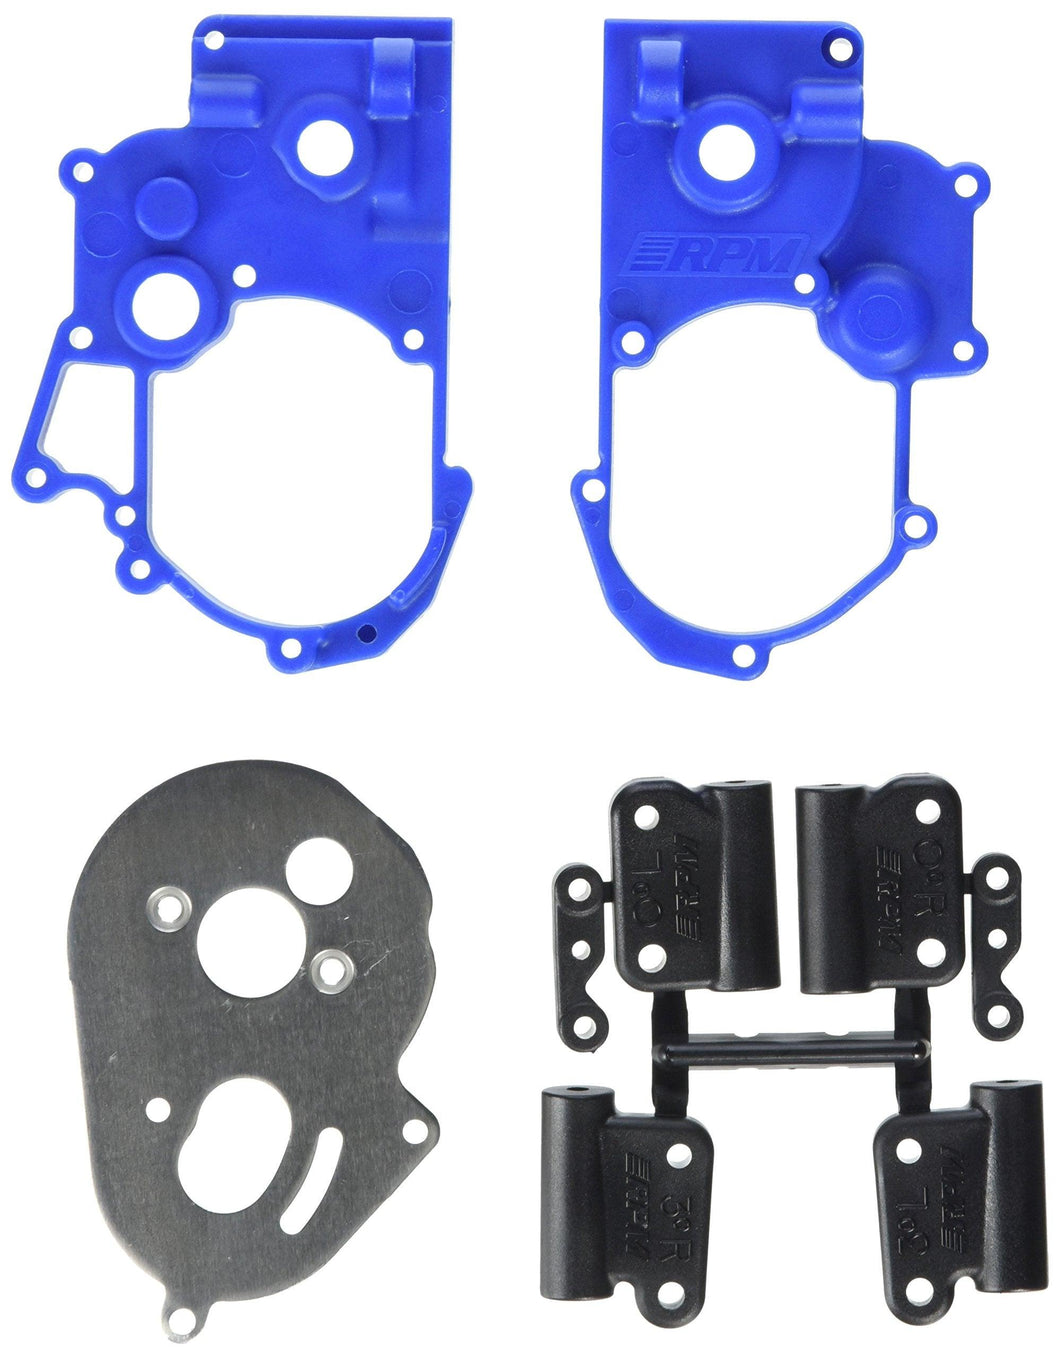 RPM Hybrid Gearbox Housing and Rear Mounts for Traxxas 2WD Electric, Blue - Hobby Shop